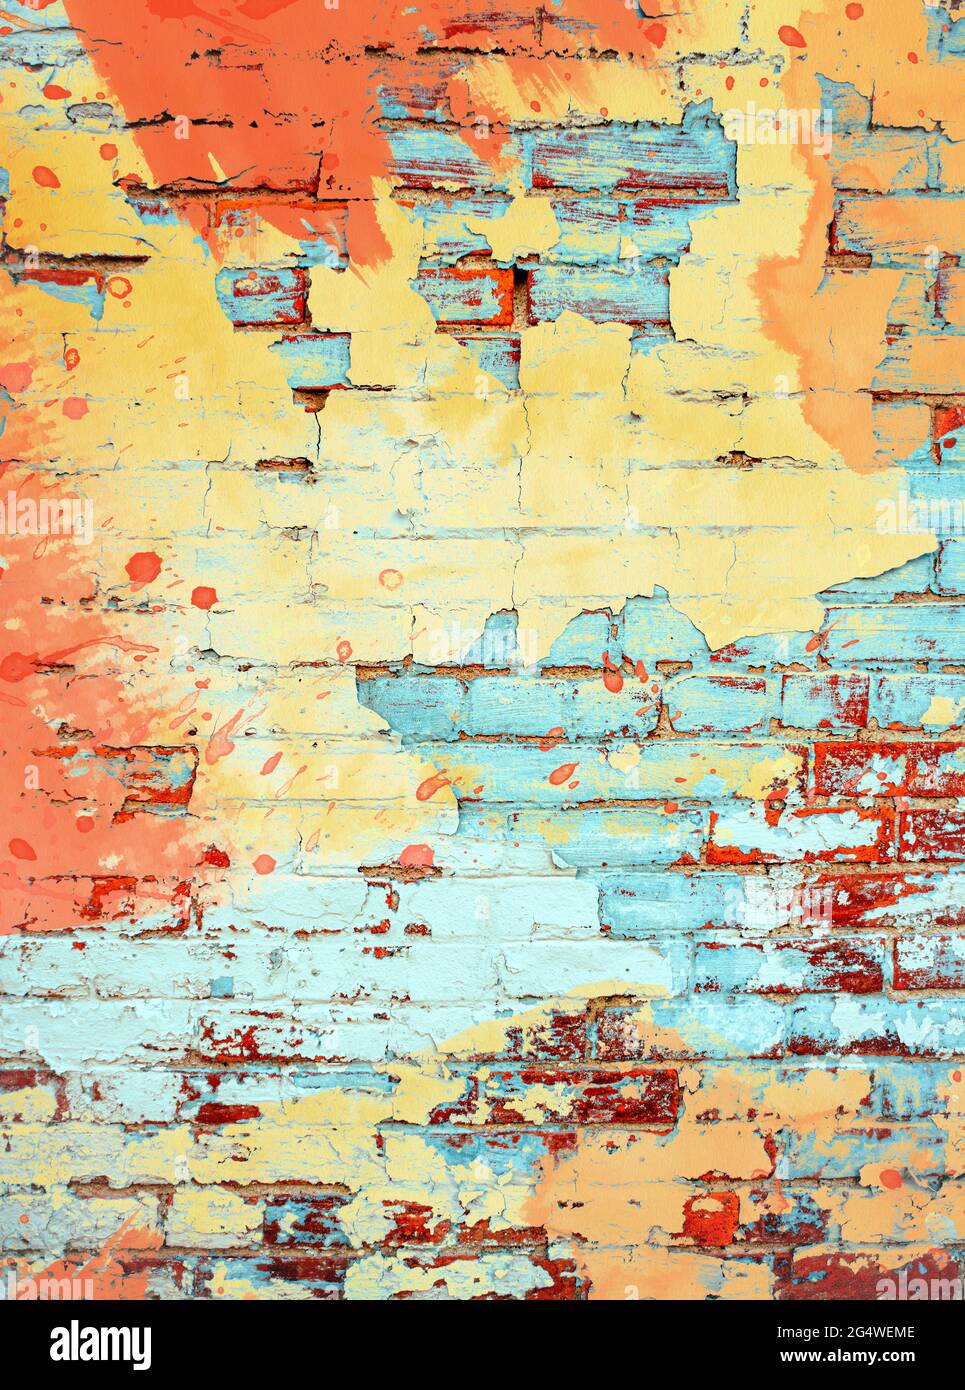 Brightly colored orange yellow and aqua turquoise paint splatter digital painting on brick wall background texture with empty space room for text Stock Photo